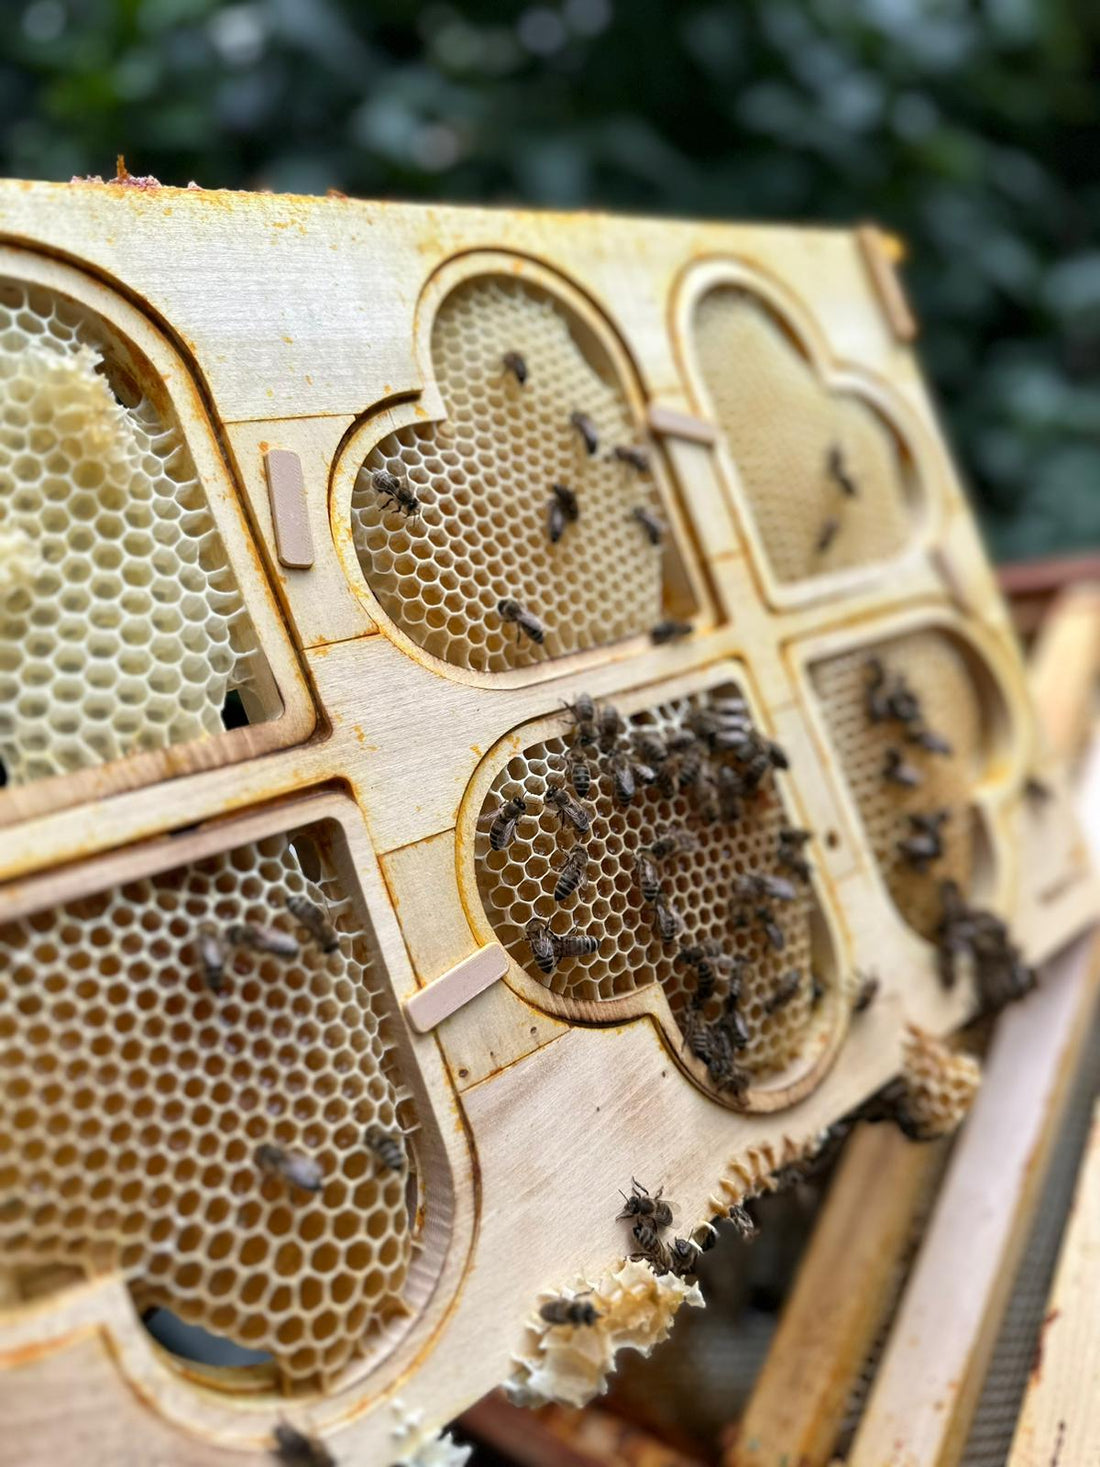 The Financial Benefits of Beekeeping: What’s the Return on Investment?